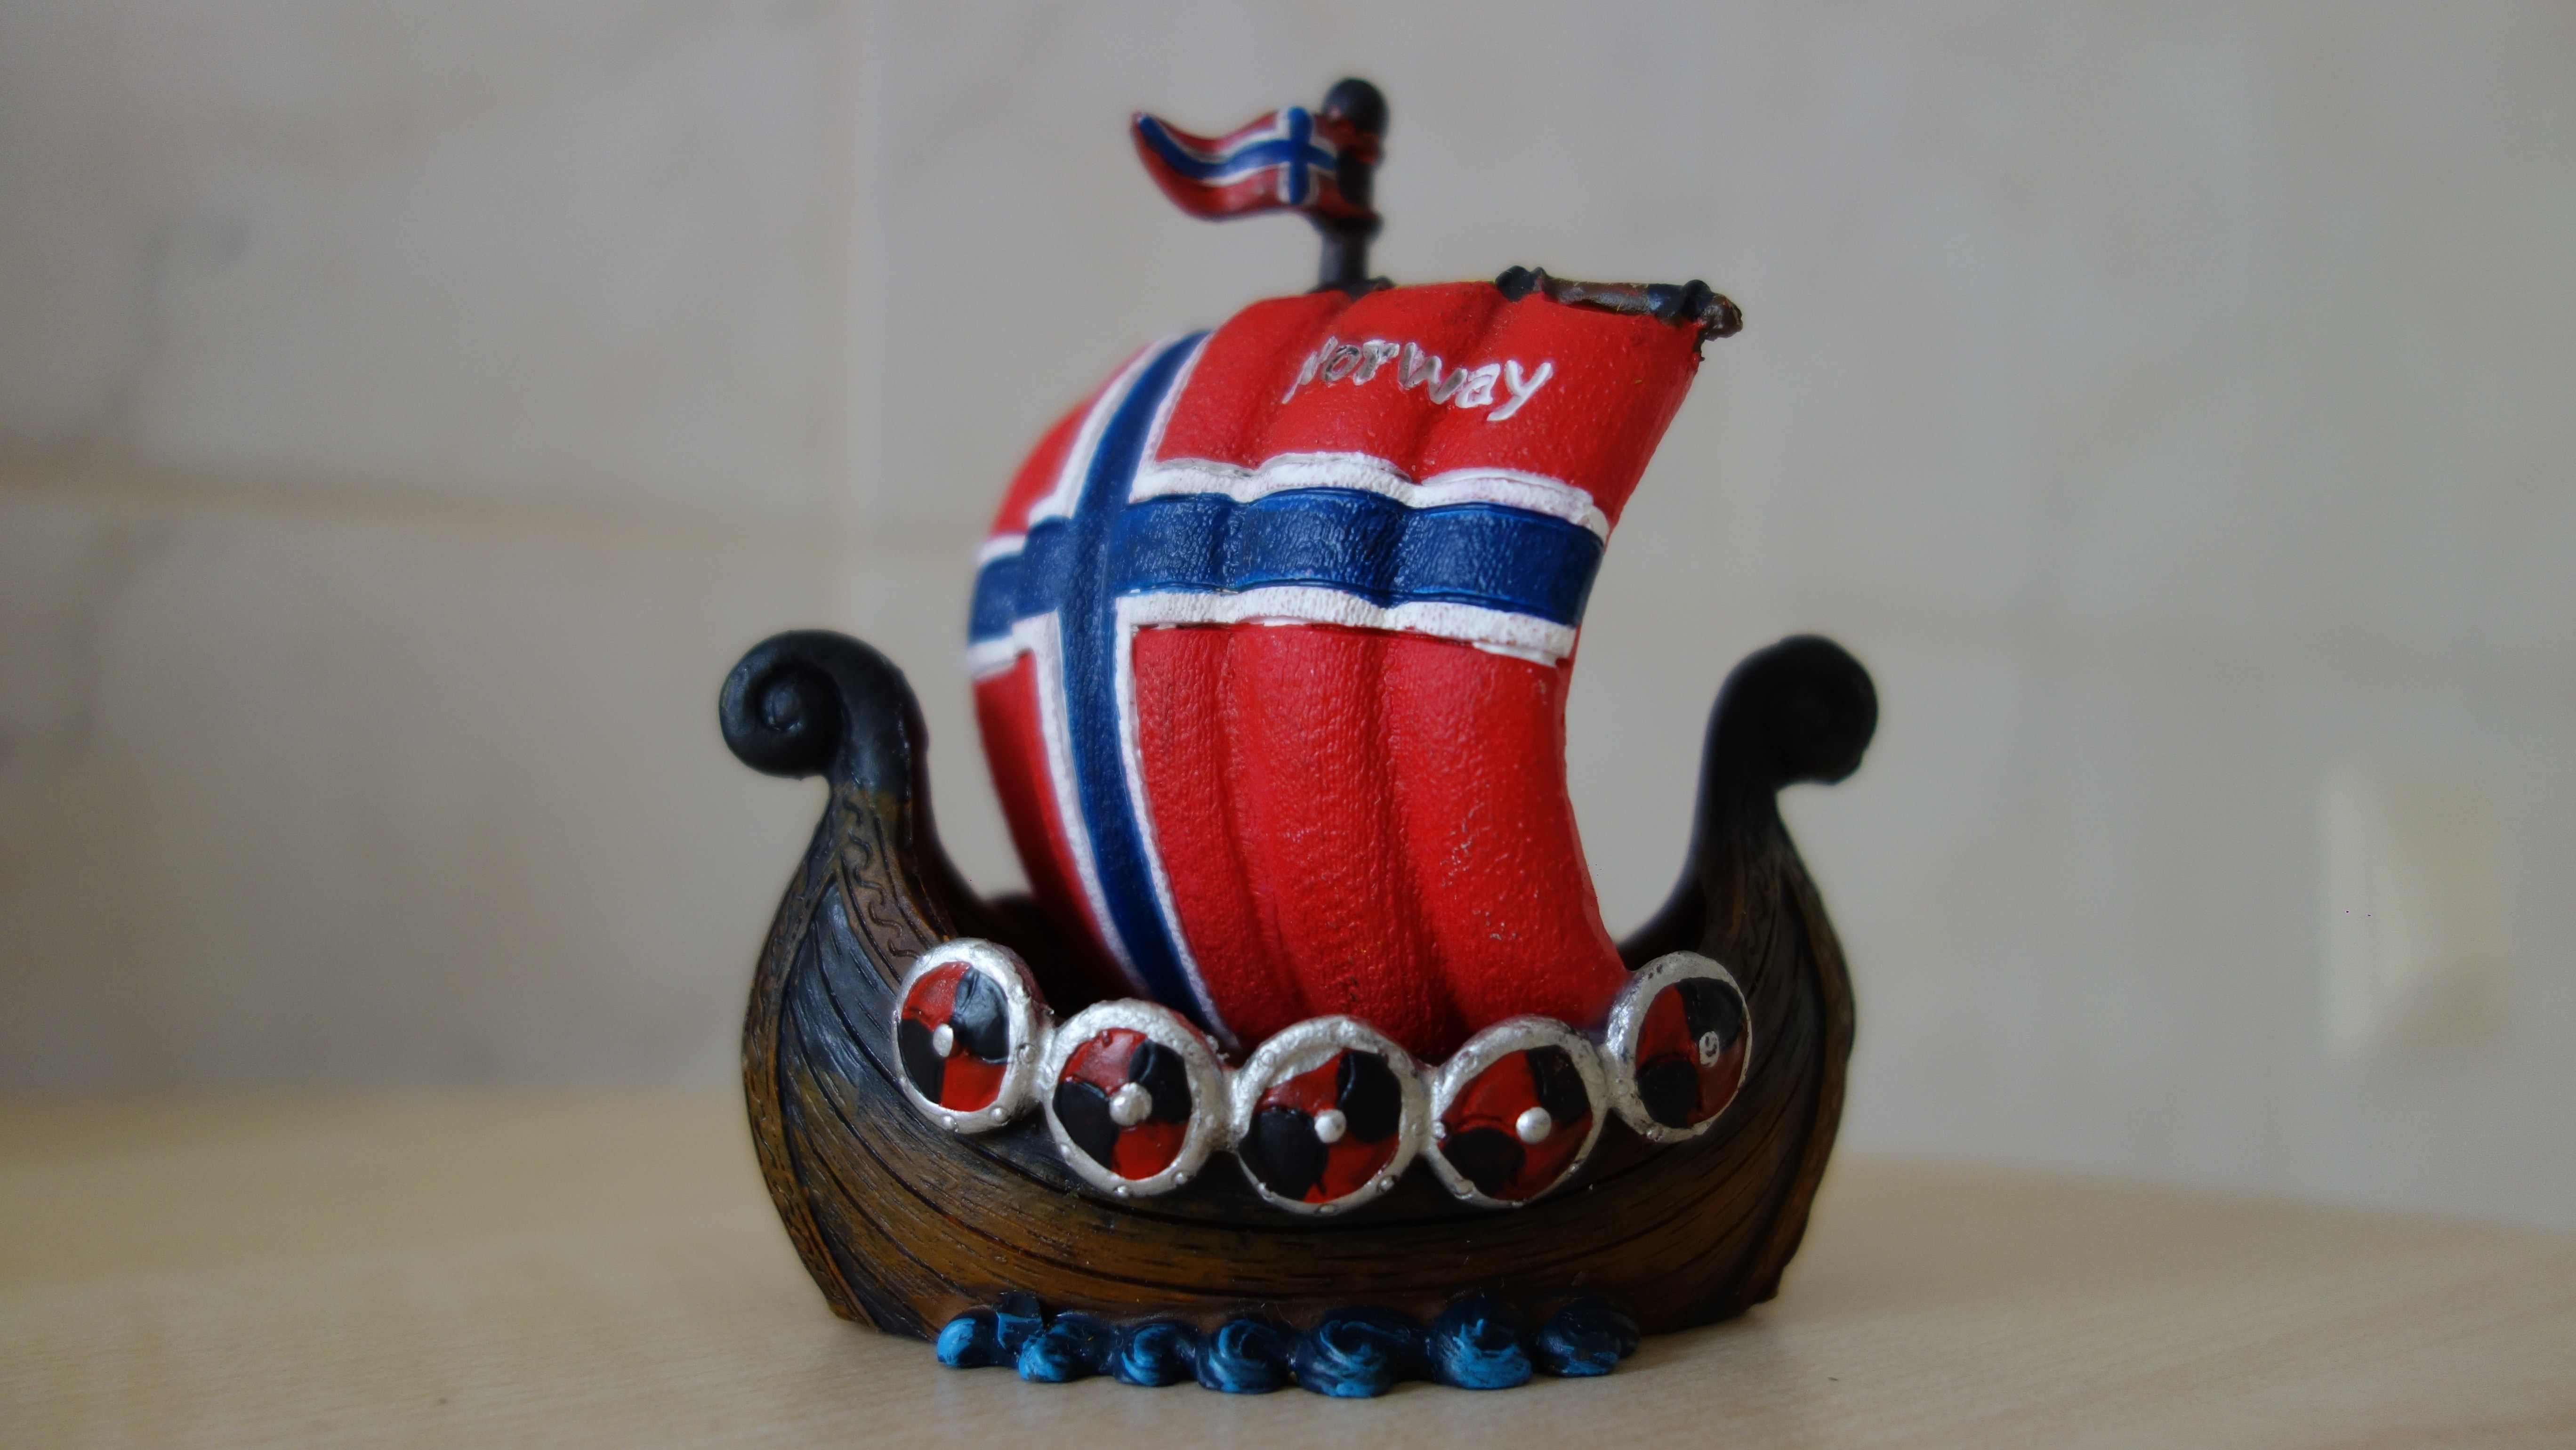 brown red blue and white galleon ship figurine